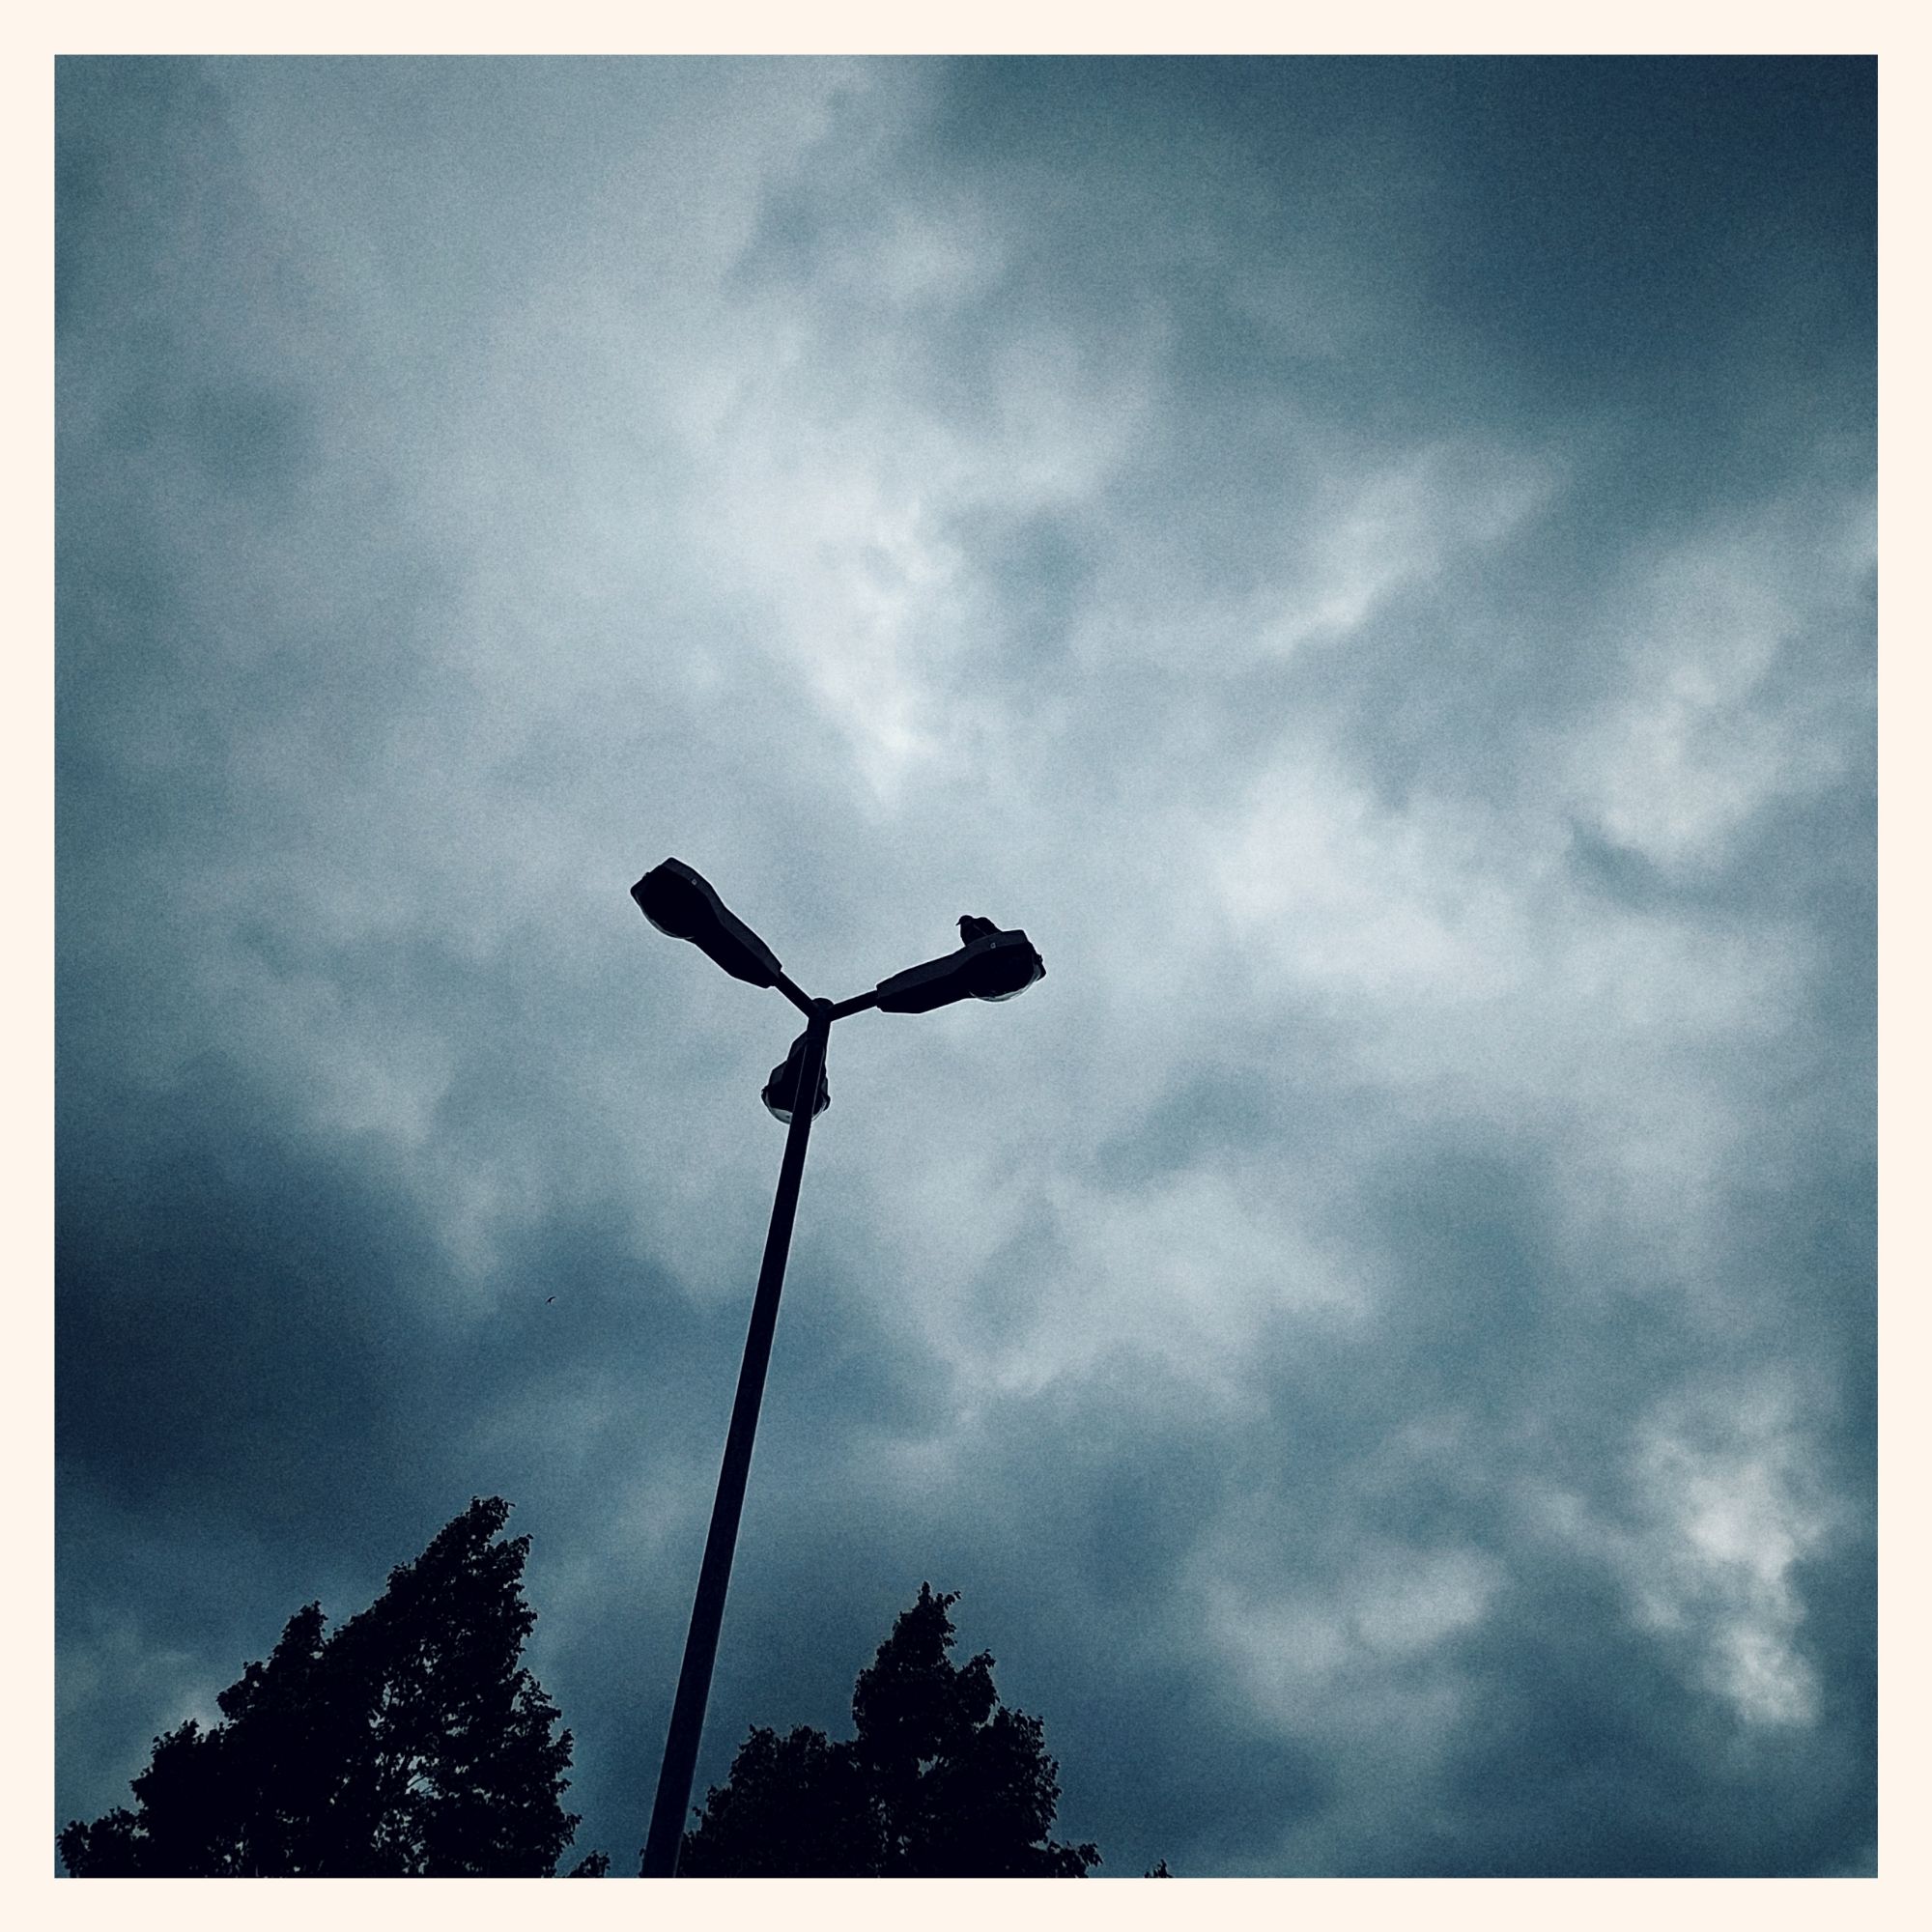 Wild evening sky. Some trees, a streetlight with three heads. And a dove on top.